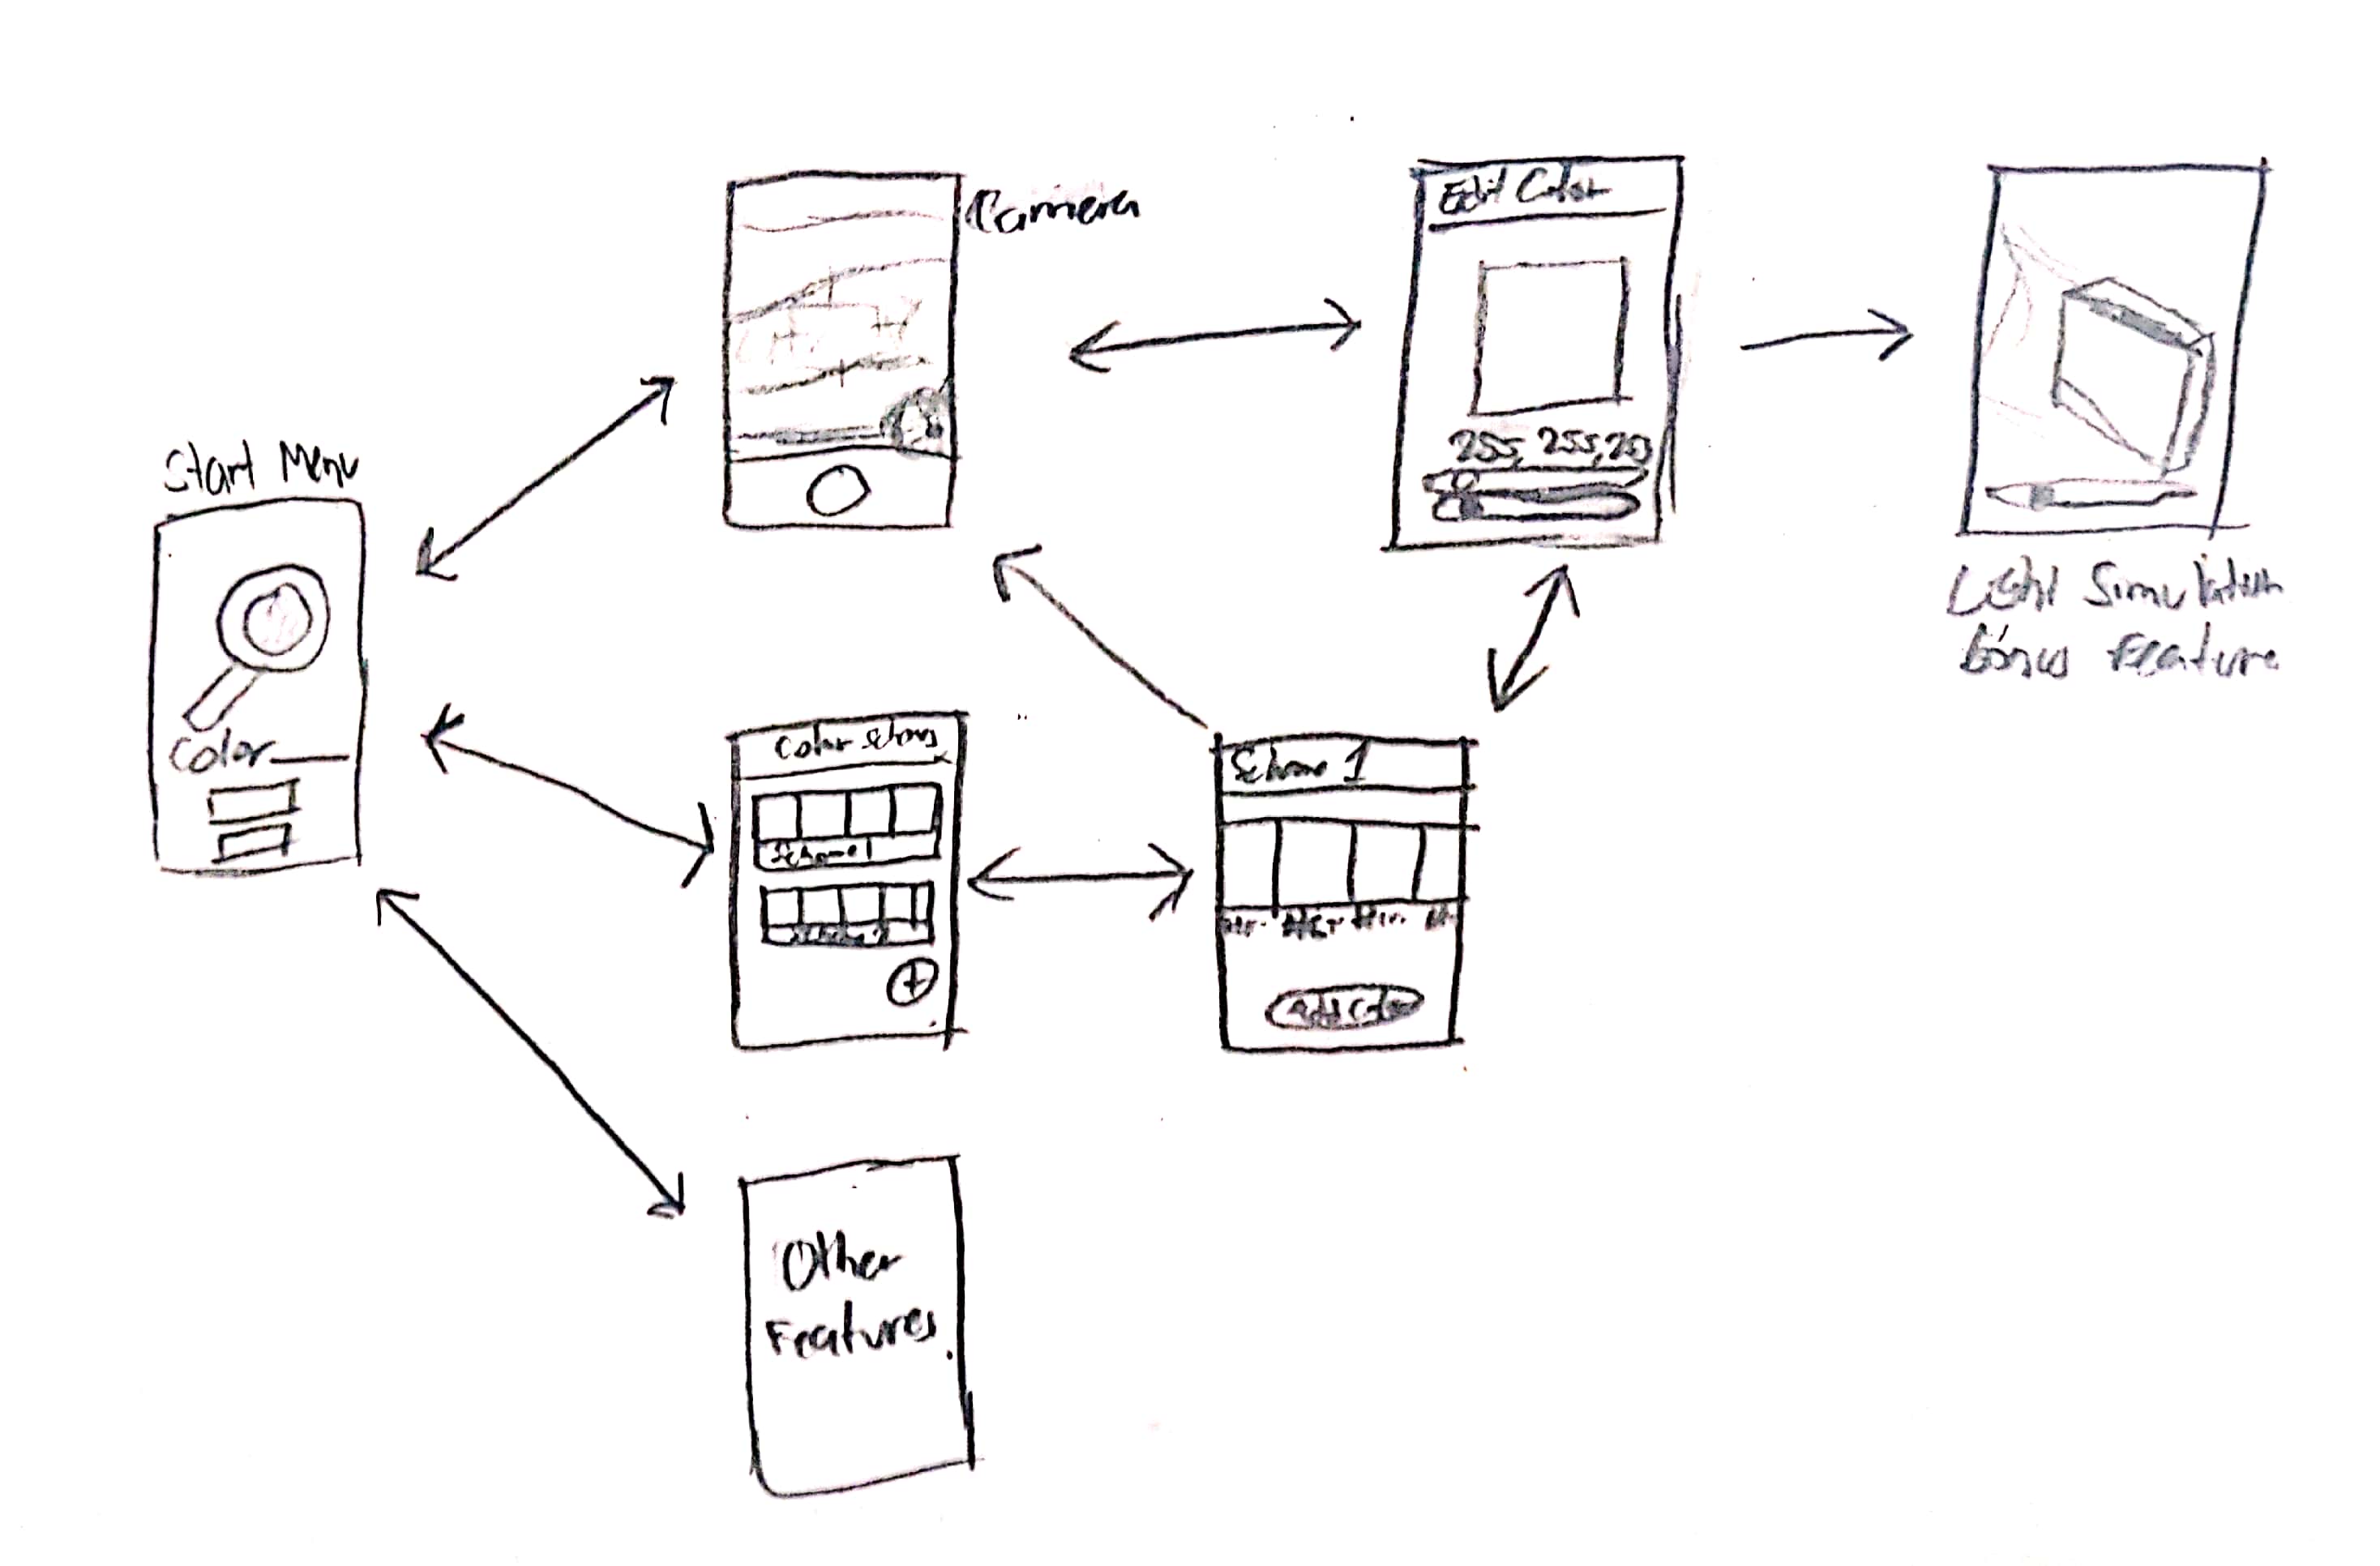 Sketch of the app's activities and their connections